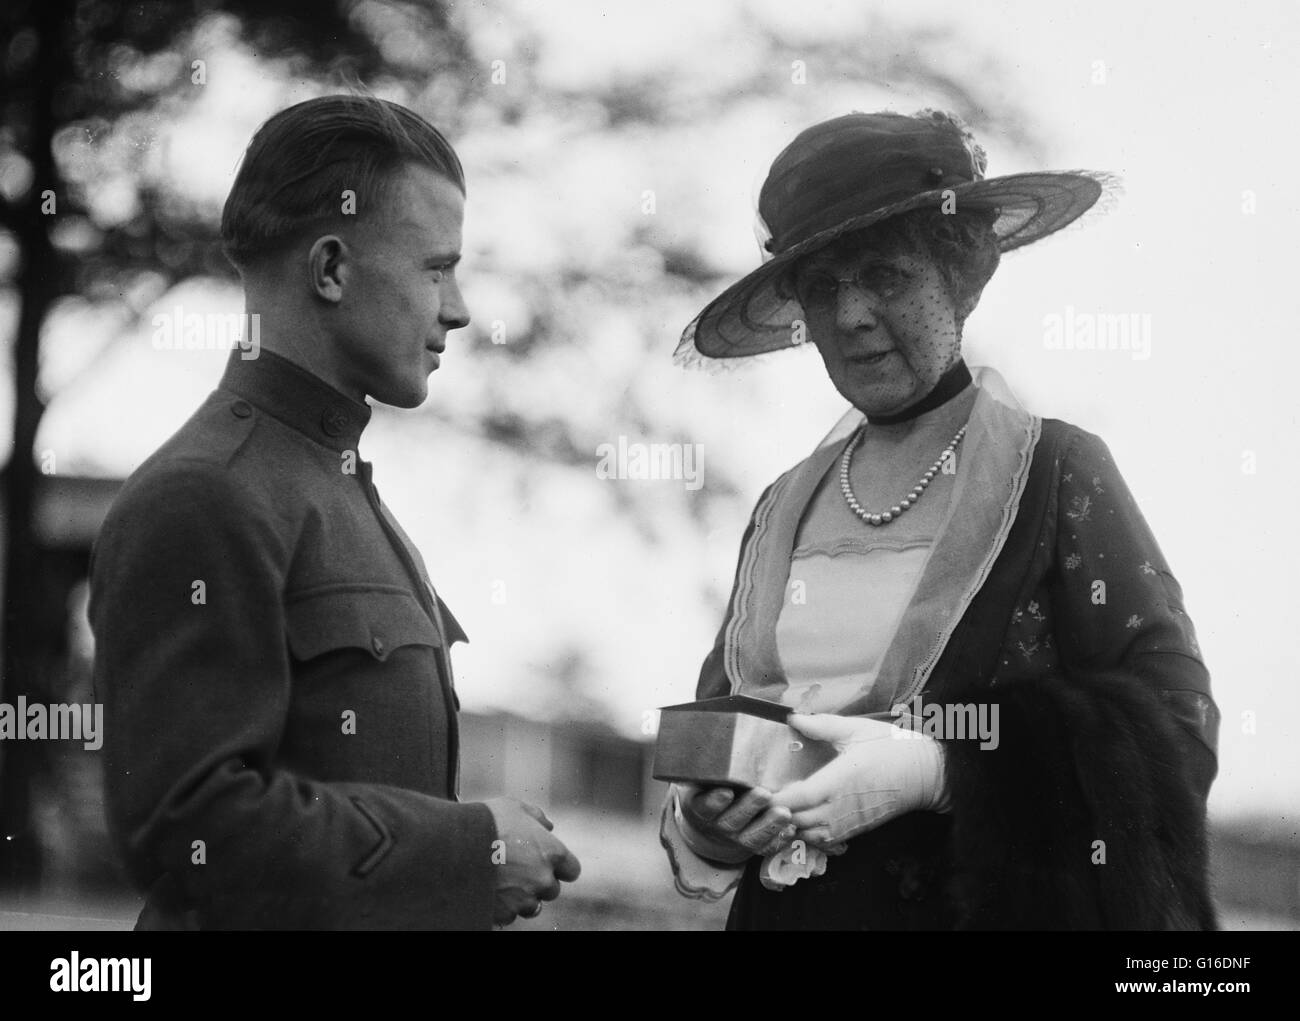 Mrs. Harding with unidentified soldier. Florence Mabel Kling Harding (August 15, 1860 - November 21, 1924) was the wife of Warren G. Harding, and First Lady of the United States from 1921 to 1923. Aiming to become a concert pianist, Florence began studies Stock Photo